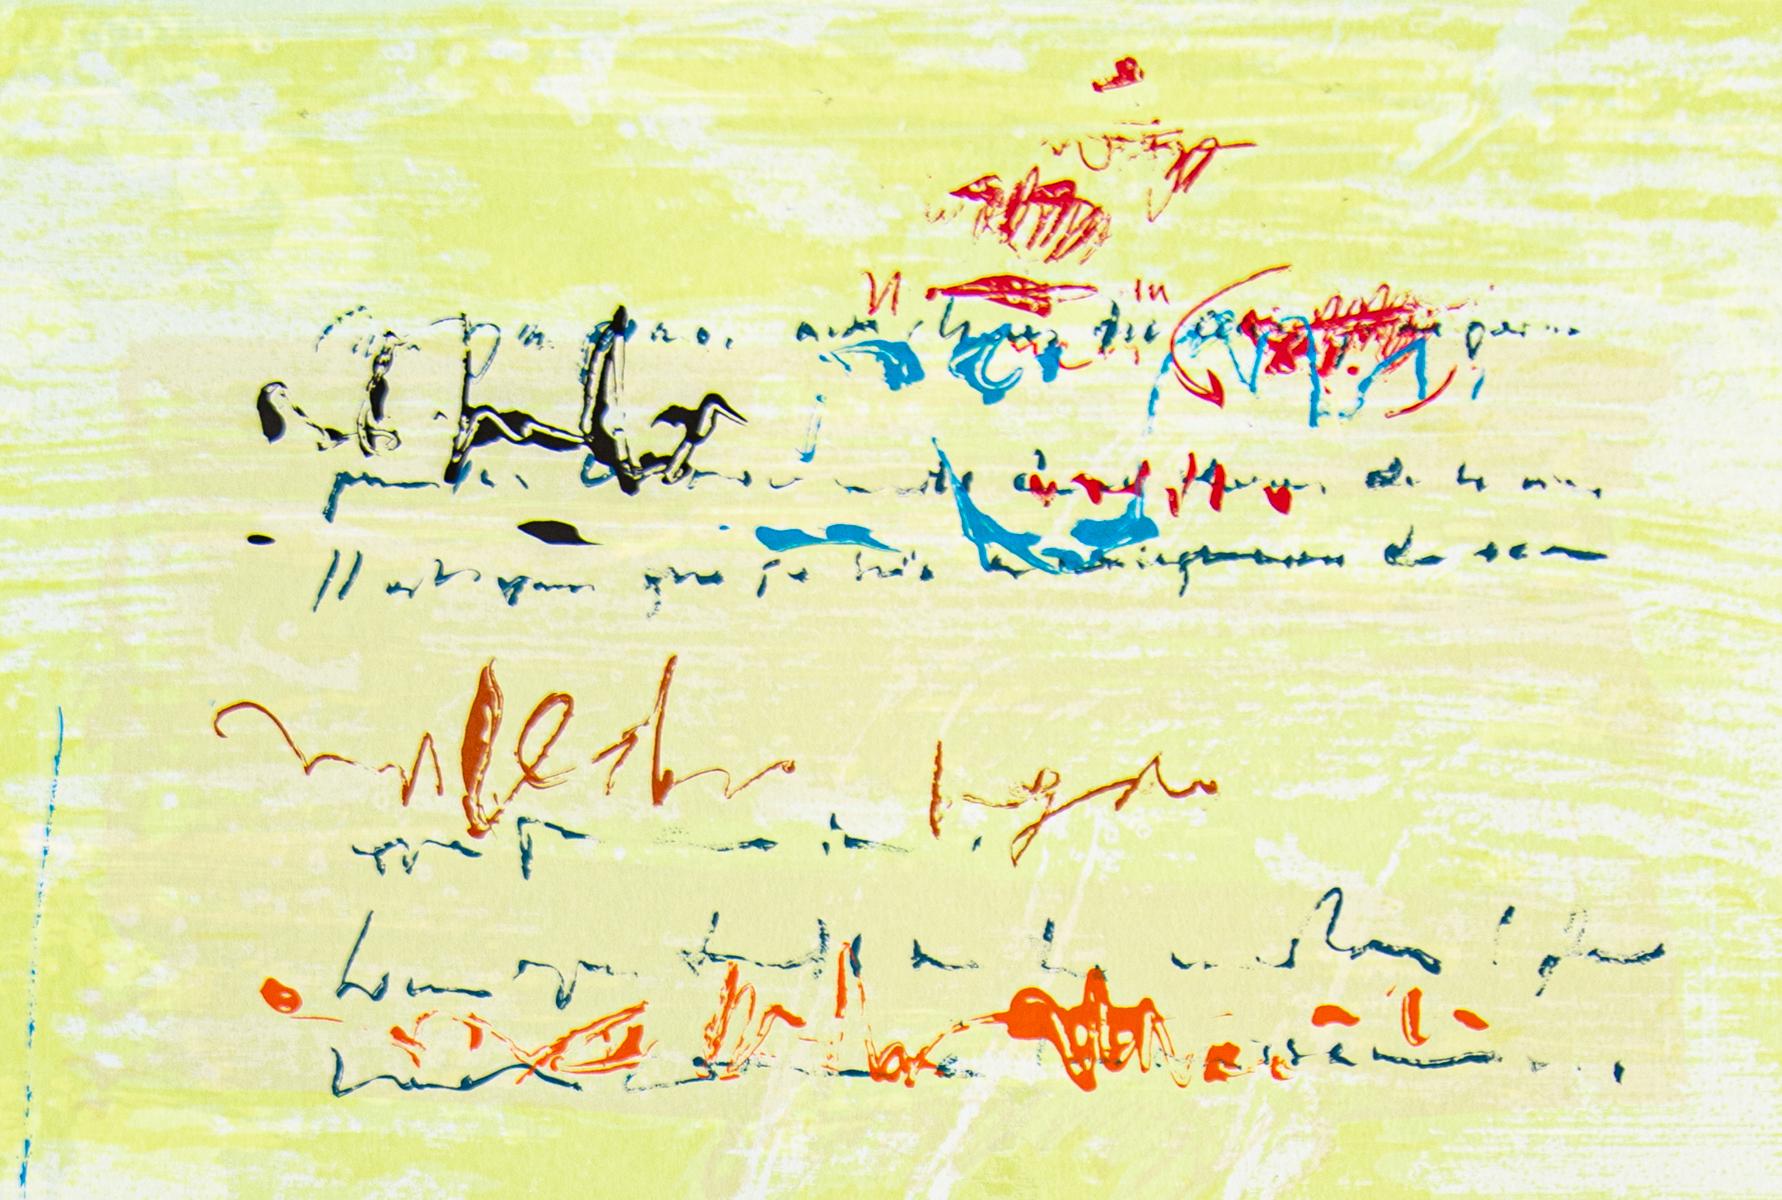 Text - Whistle 9/36 - colorful, calligraphic gestures, serigraph on paper  - Print by Alice Teichert